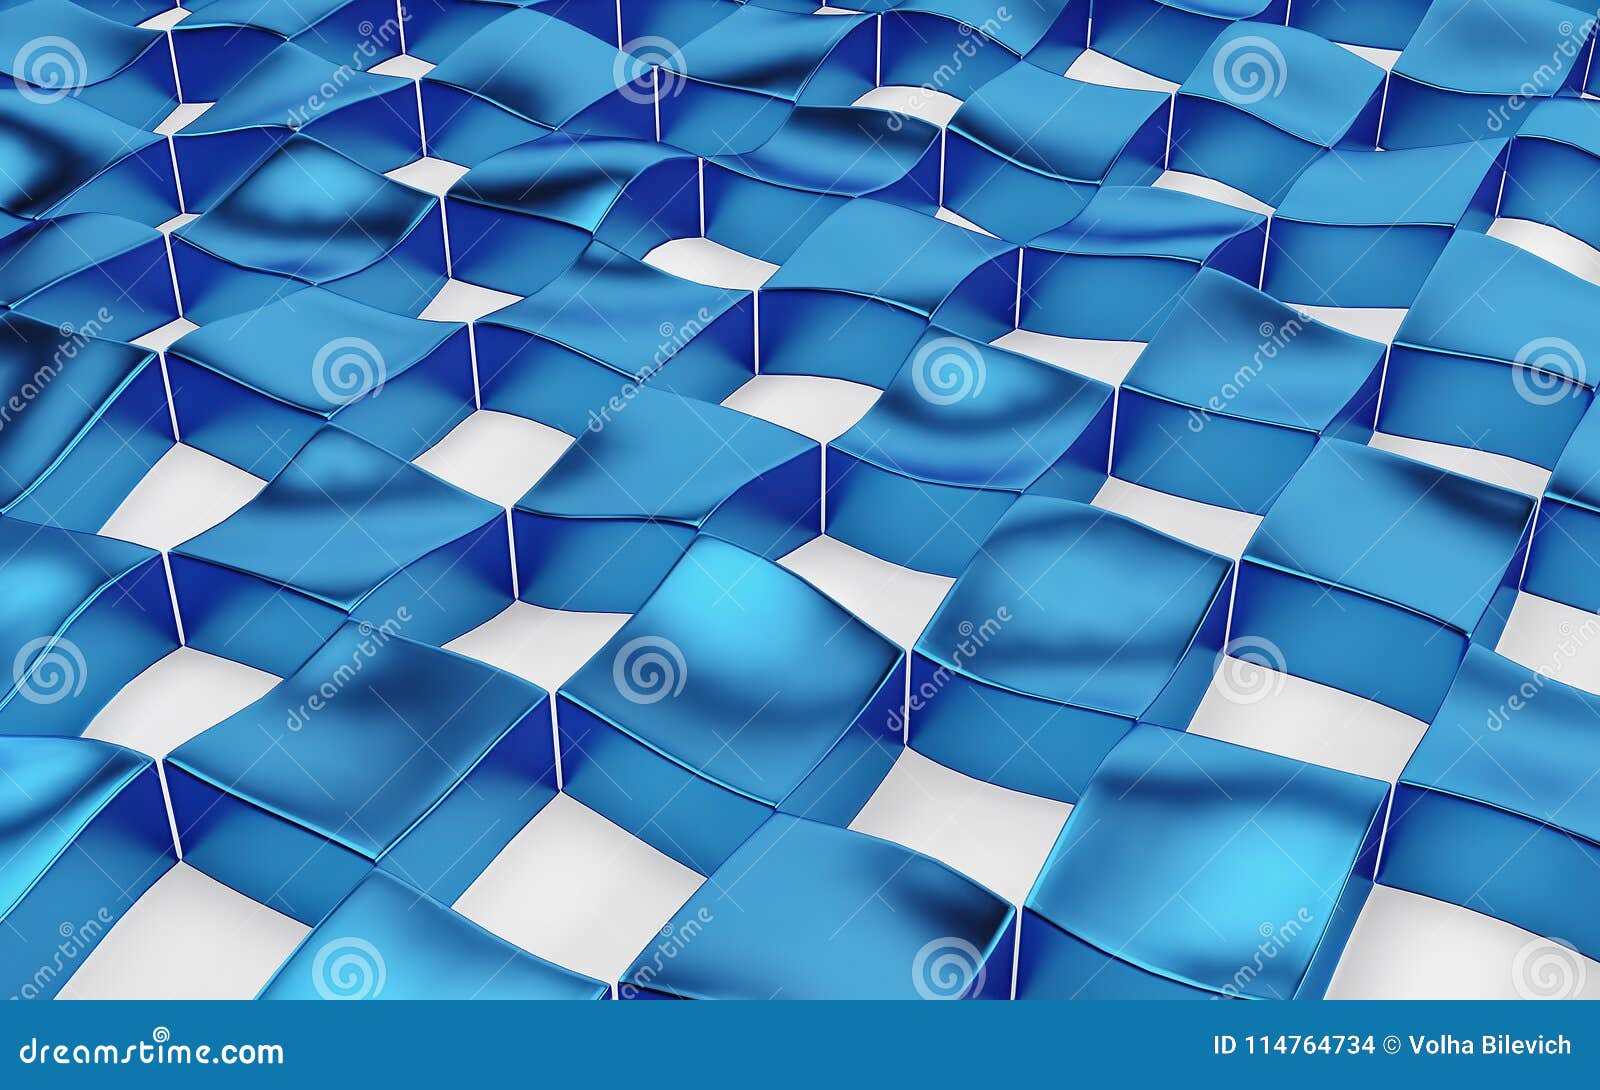 Abstract Array Of Shinny Blue And White Polygons 3d